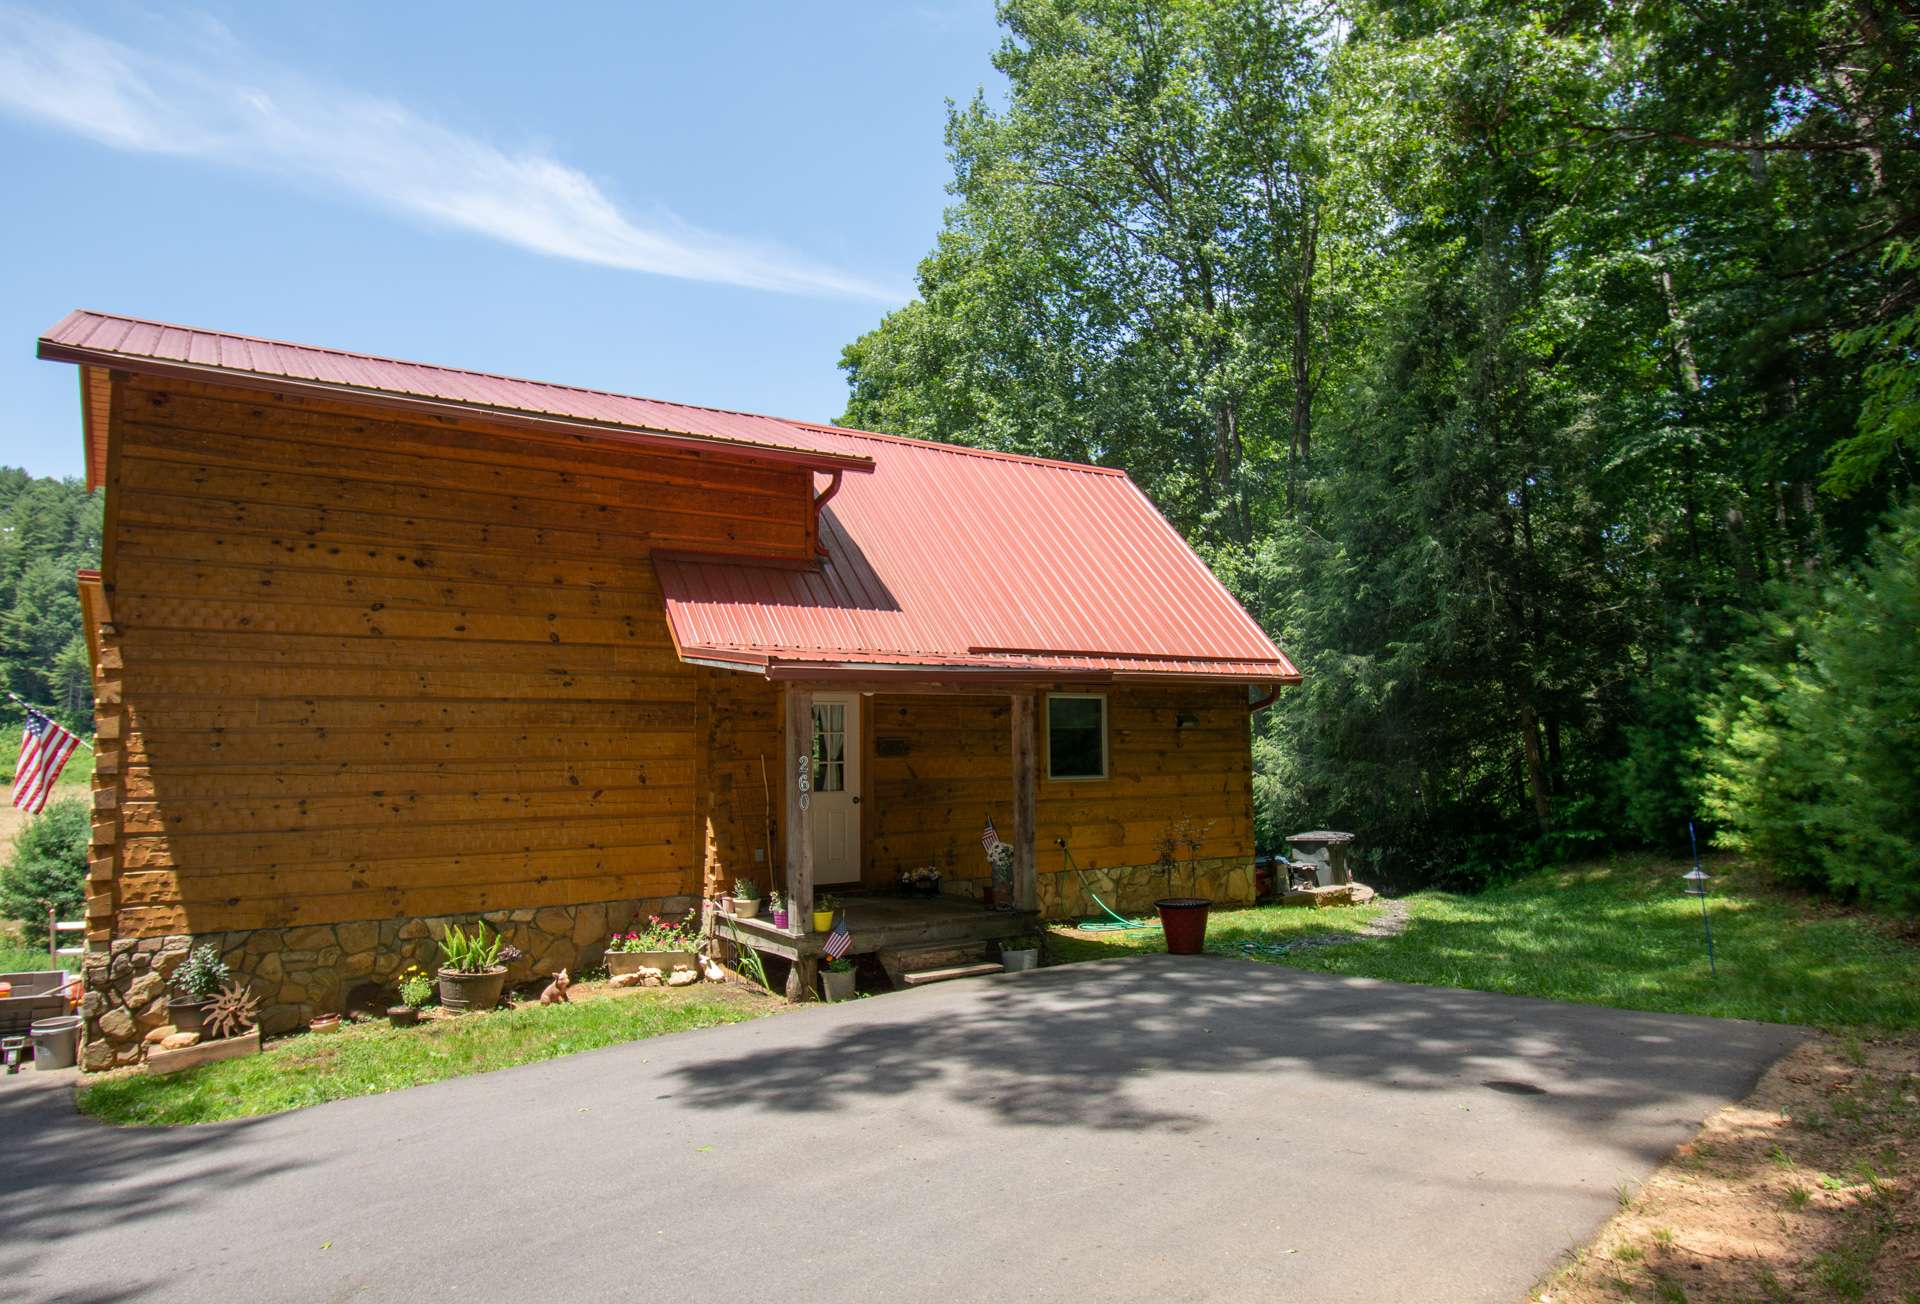 This 2-bedroom, plus bonus room, 3-bath log cabin welcomes you to experience mountain log cabin living with river frontage to enjoy kayaking, tubing, fishing, and exploring the New River.